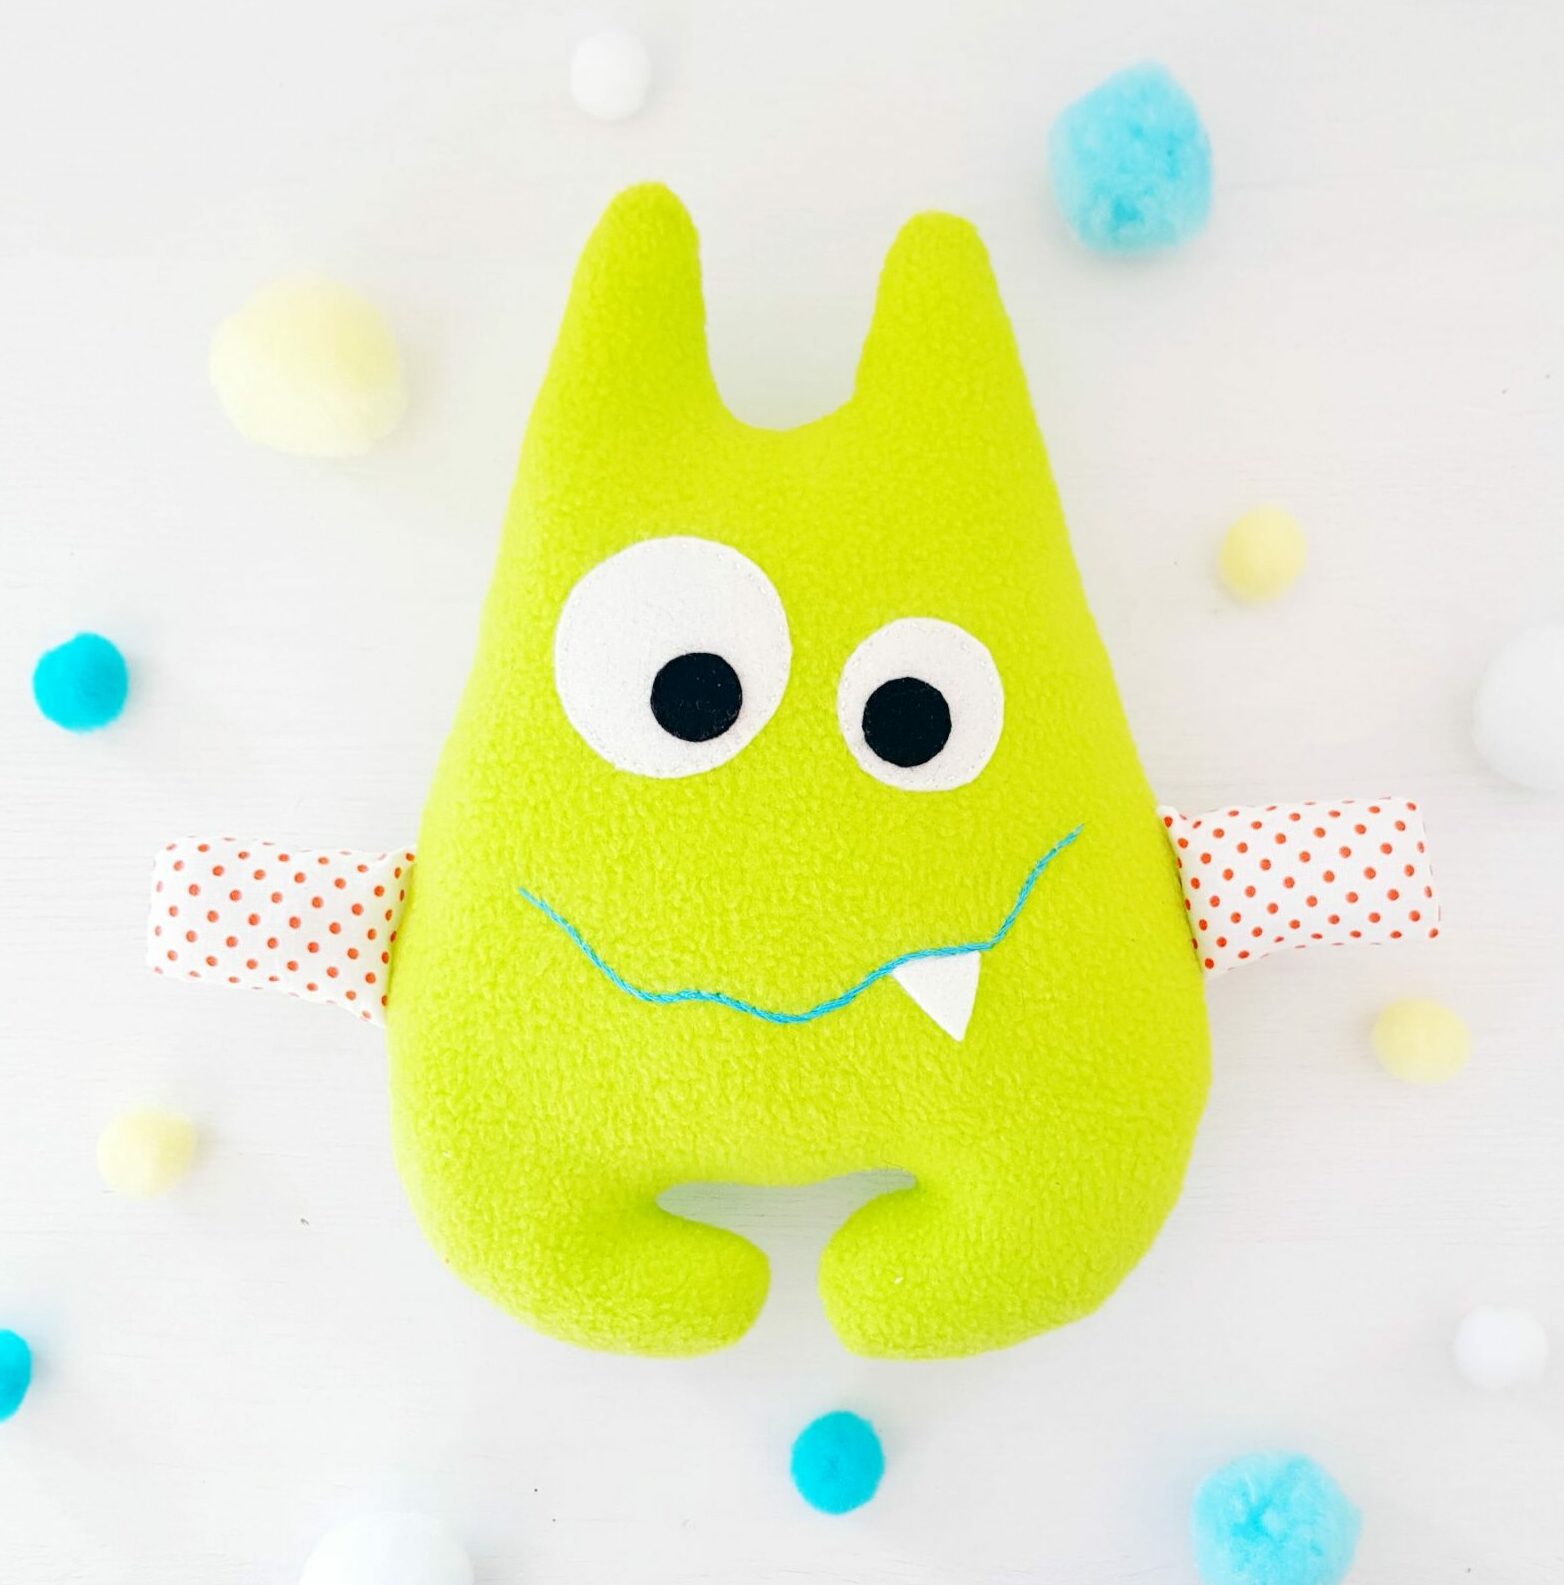 New in the shop - Cute monster sewing pattern for soft toys - beginner